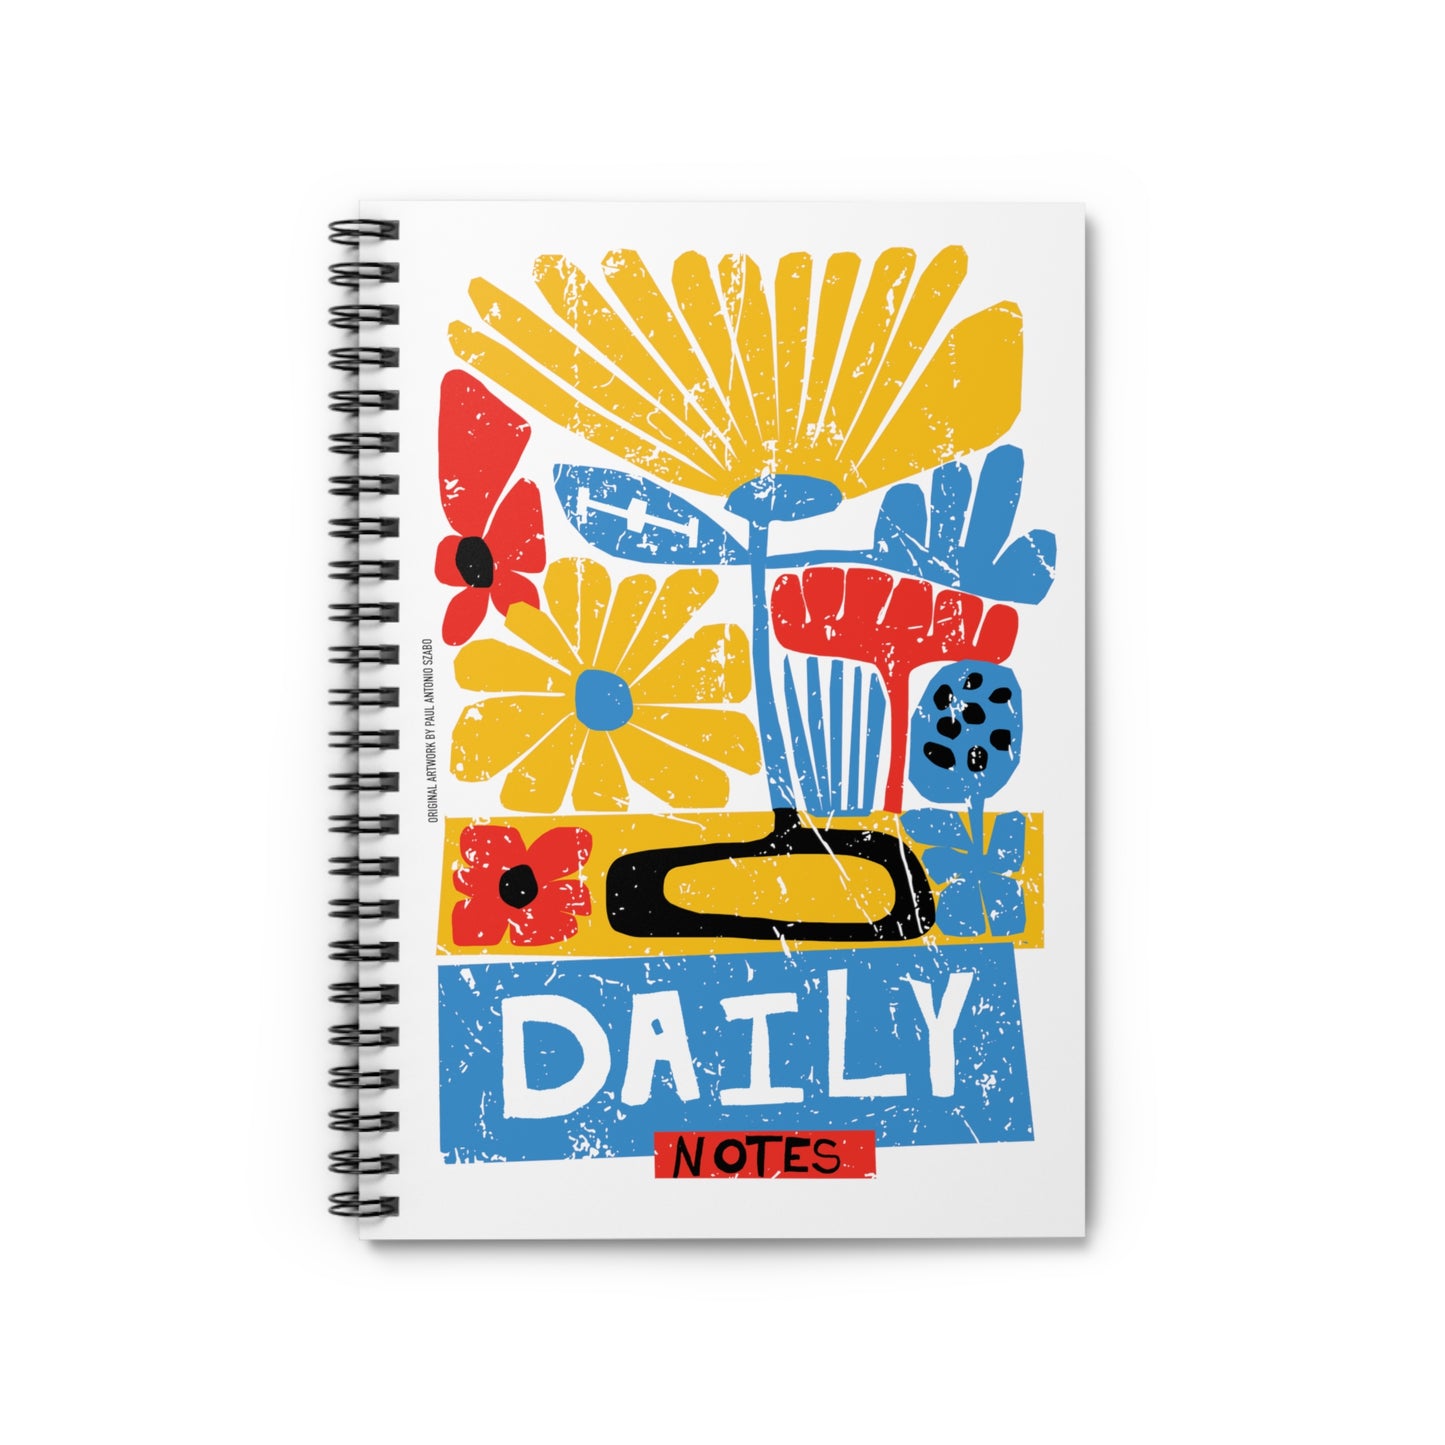 Daily Notes. La Isla. Spiral Handwriting Note Book by United Day Dreamers